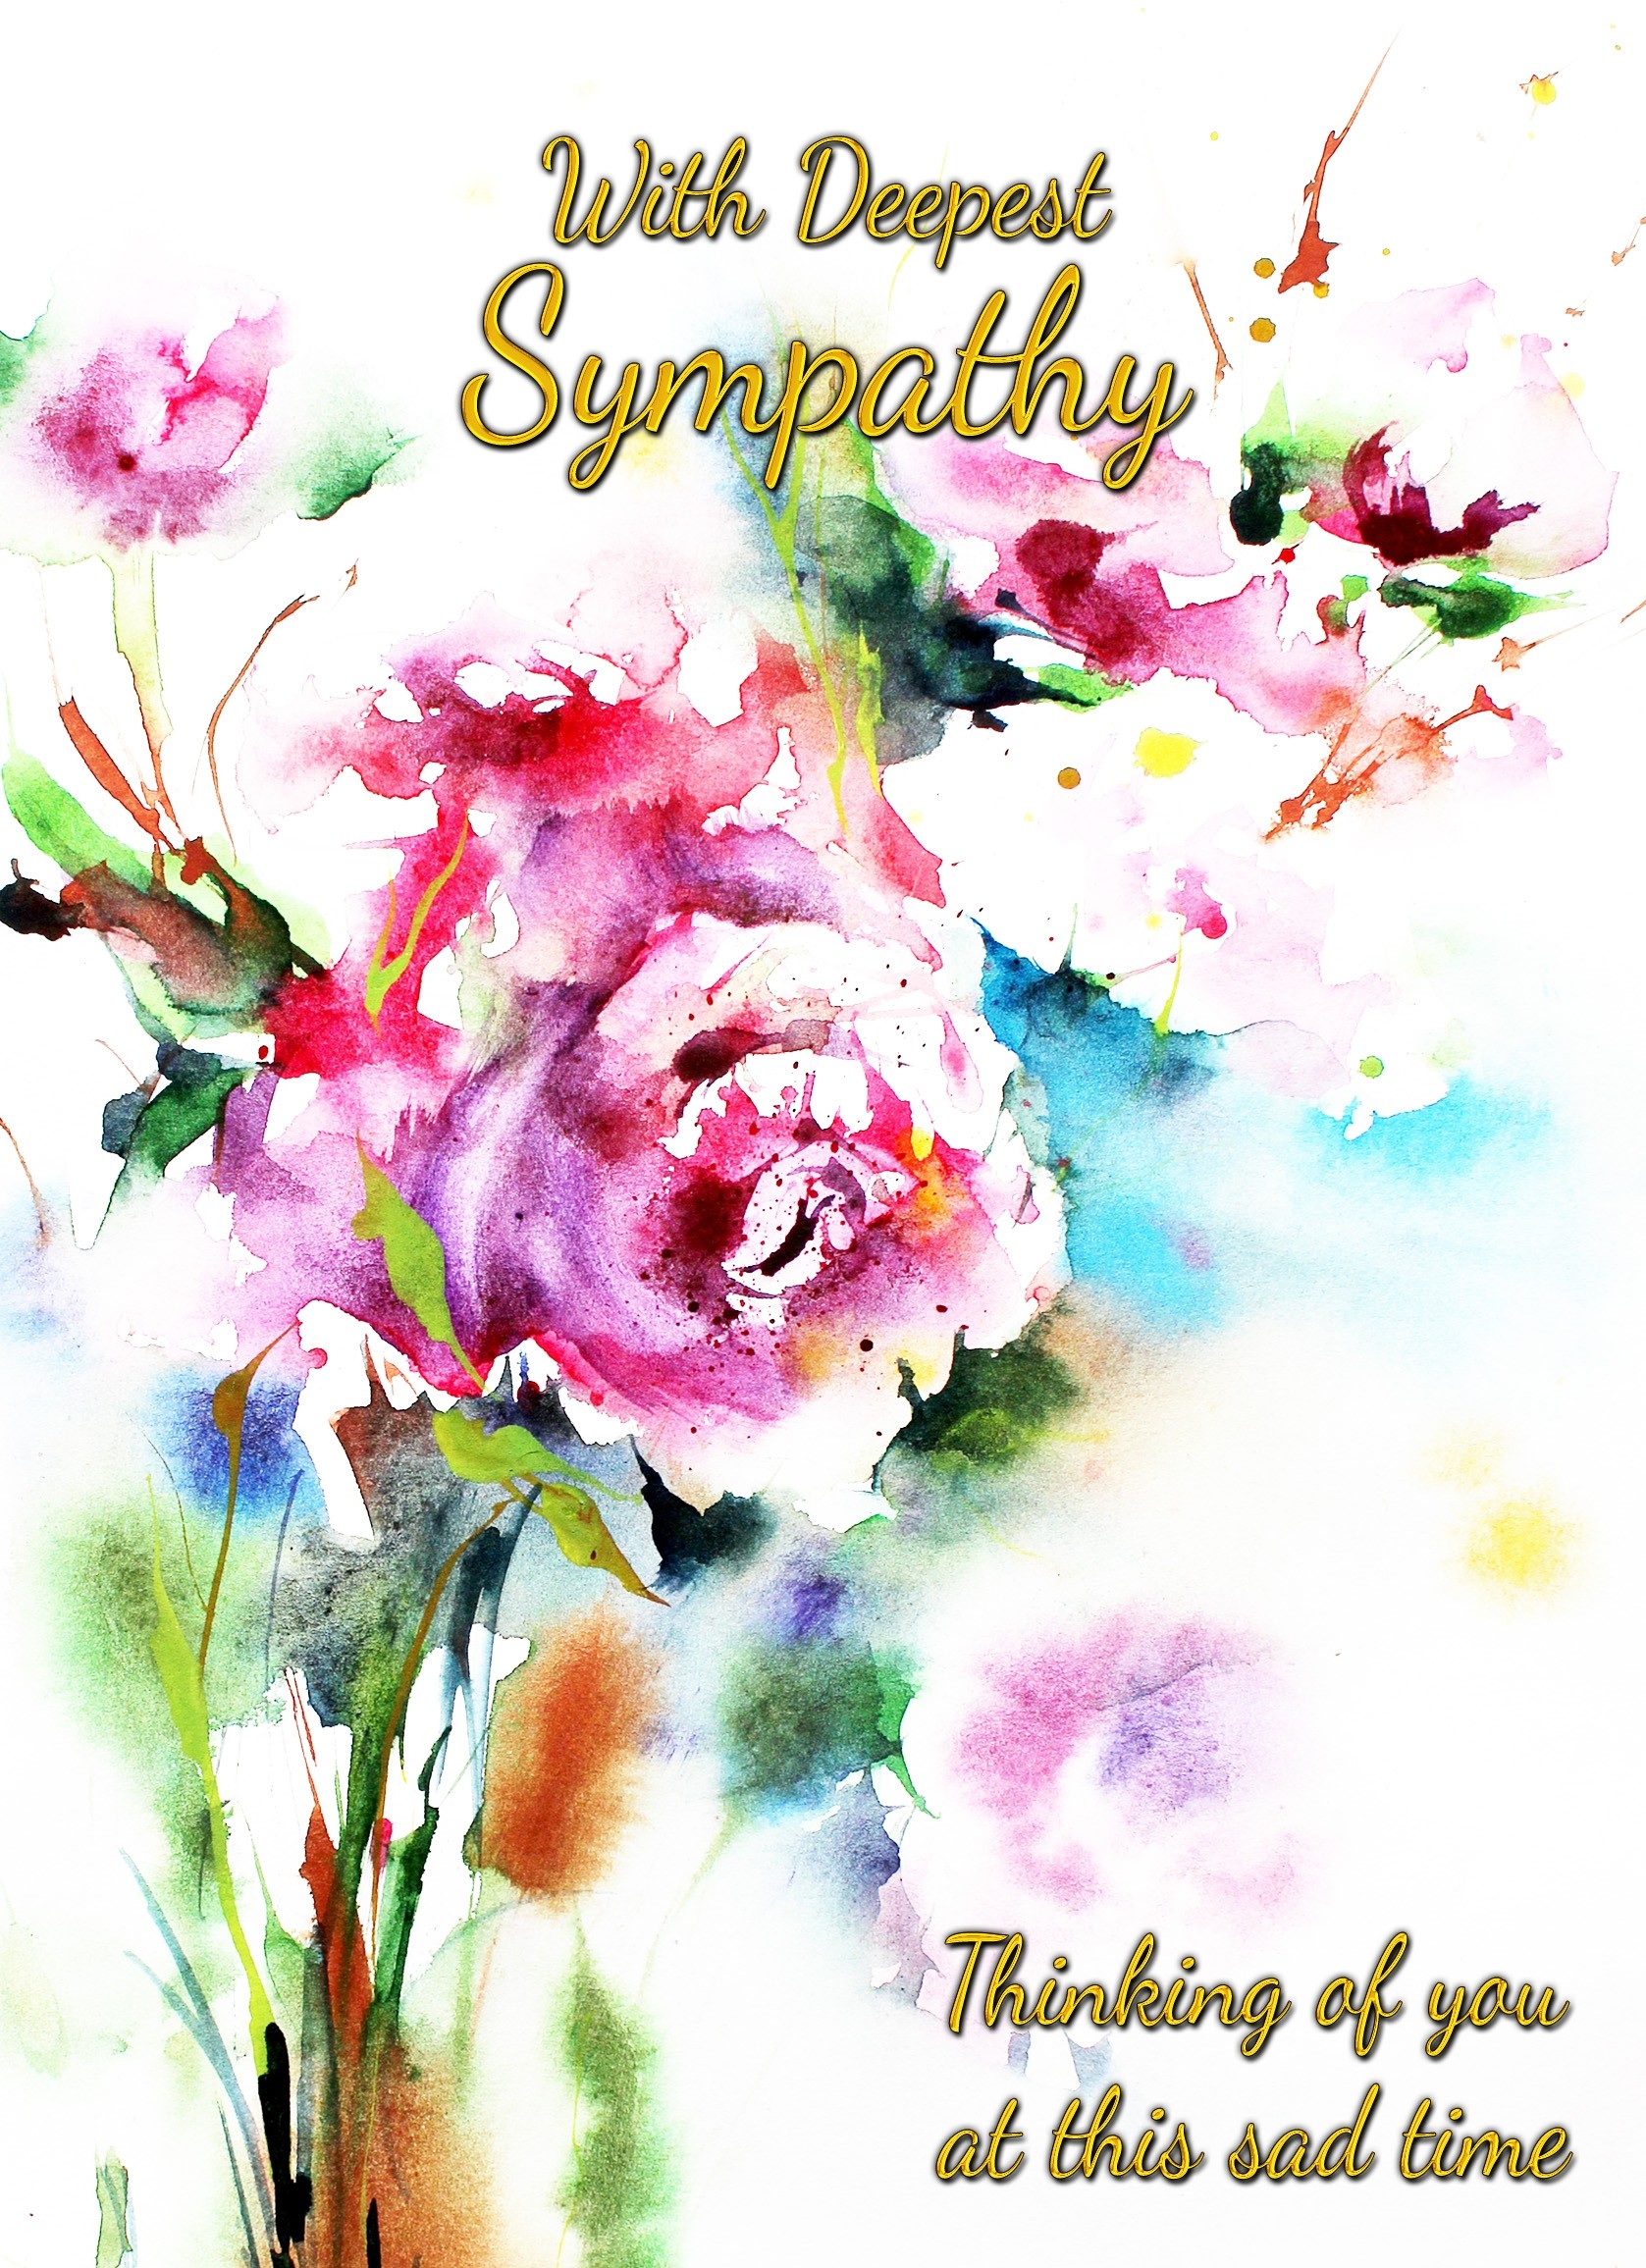 Sympathy Bereavement Card (With Deepest Sympathy, Pink Flower)